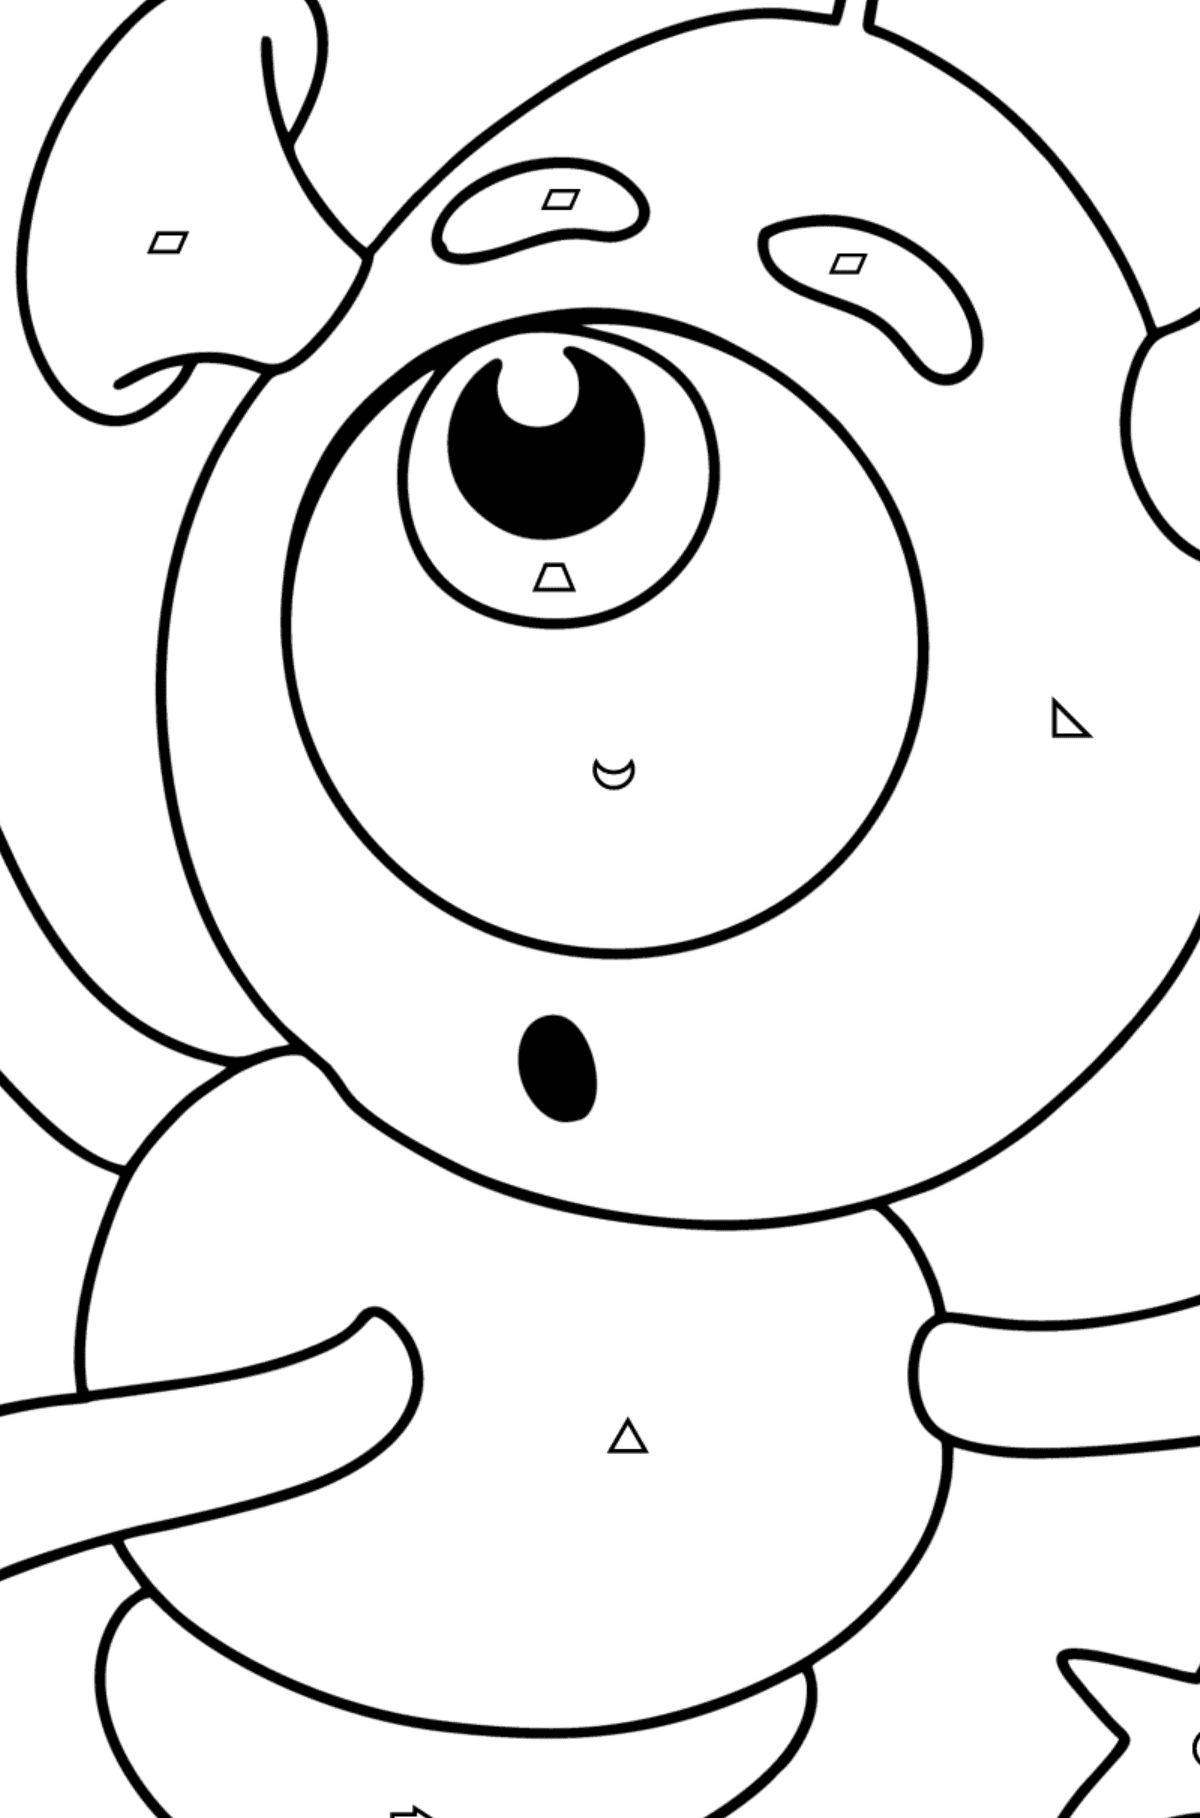 Little Alien Coloring page - Coloring by Geometric Shapes for Kids